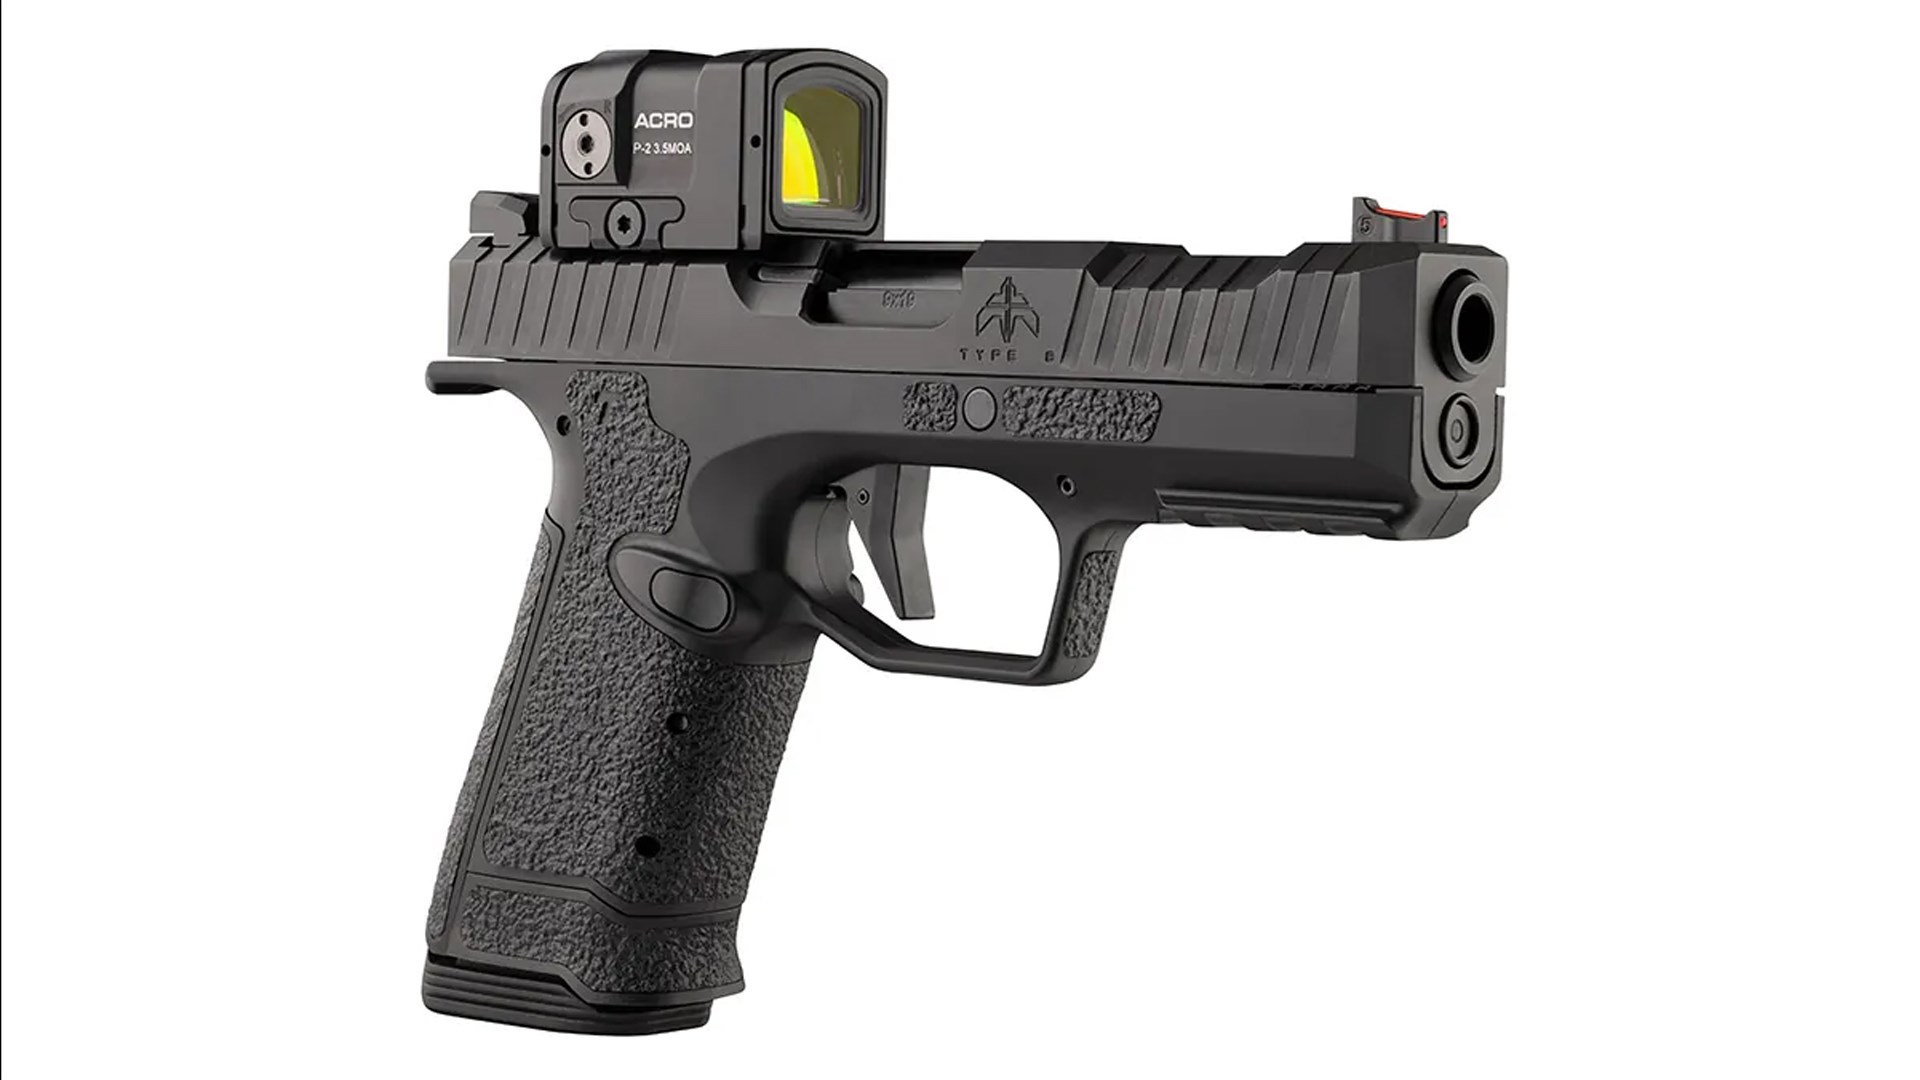 Right side of the PTR Archon Type B shown with a mounted Aimpoint ACRO red-dot sight.